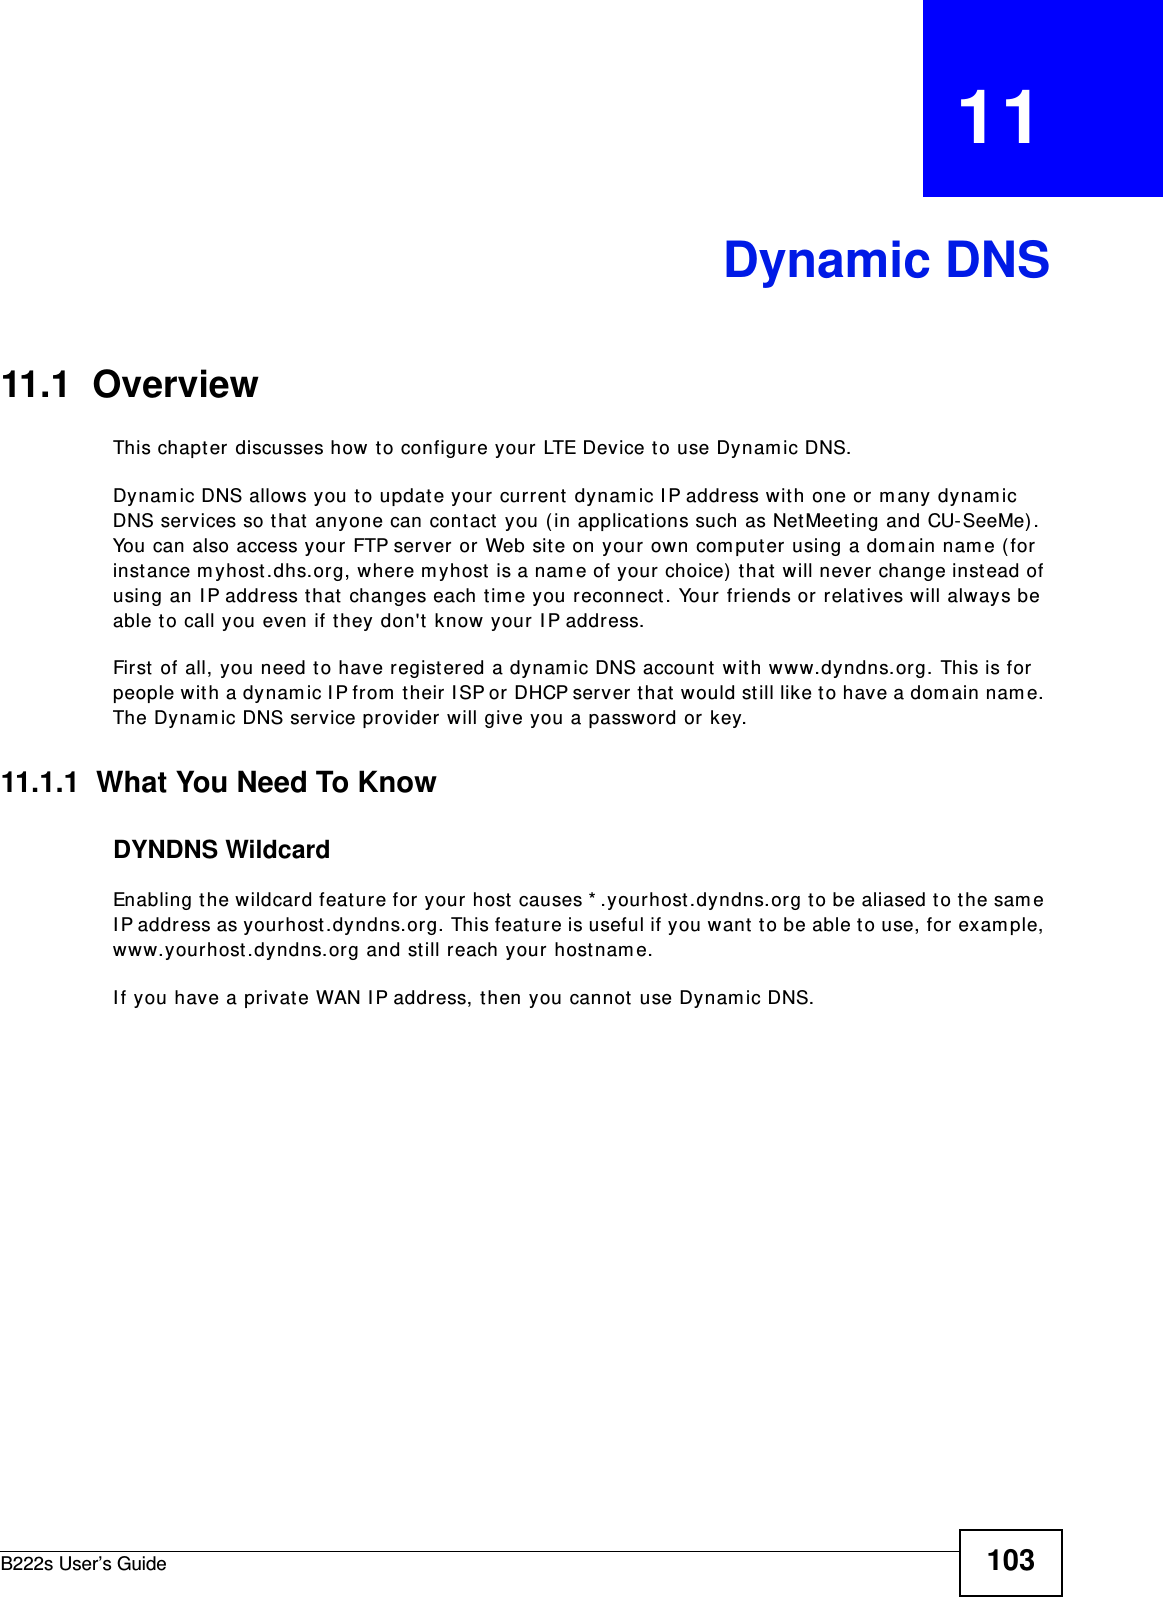 B222s User’s Guide 103CHAPTER   11Dynamic DNS11.1  Overview This chapt er  discusses how to configure your LTE Device t o use Dynam ic DNS.Dynam ic DNS allows you t o updat e your  current  dynam ic I P address wit h one or m any dynam ic DNS services so that  anyone can cont act you ( in applications such as NetMeet ing and CU- SeeMe) . You can also access your FTP server or Web sit e on your own com puter using a dom ain nam e ( for instance m yhost .dhs.org, where m yhost is a nam e of your choice) t hat  will never change instead of using an I P address t hat  changes each t im e you reconnect . Your friends or relatives will always be able to call you even if t hey don&apos;t  know your  I P address.First  of all, you need t o have regist ered a dynam ic DNS account  wit h www.dyndns.org. This is for people wit h a dynam ic I P from  their I SP or DHCP server that  would still like to have a dom ain nam e. The Dynam ic DNS service provider will give you a password or key. 11.1.1  What You Need To KnowDYNDNS WildcardEnabling t he wildcard feat ure for your host  causes * .yourhost .dyndns.org t o be aliased t o the sam e I P addr ess as yourhost.dyndns.org. This feat ure is useful if you want  t o be able t o use, for exam ple, www.yourhost.dyndns.org and st ill reach your host nam e.I f you have a privat e WAN I P address, t hen you cannot use Dynam ic DNS.